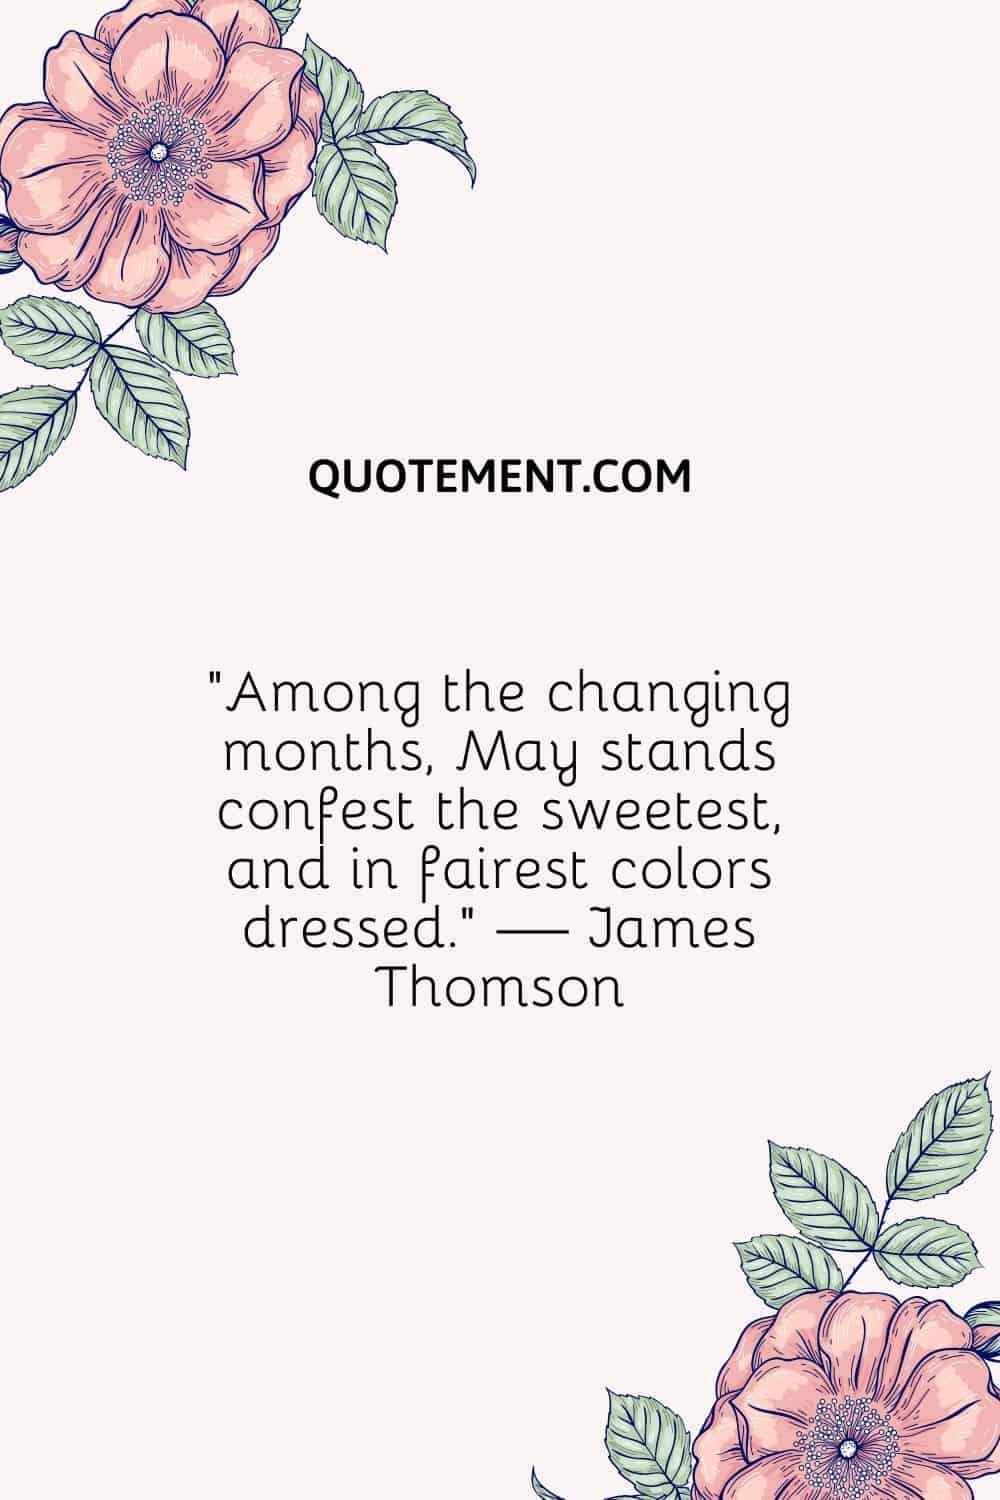 “Among the changing months, May stands confest the sweetest, and in fairest colors dressed.” — James Thomson